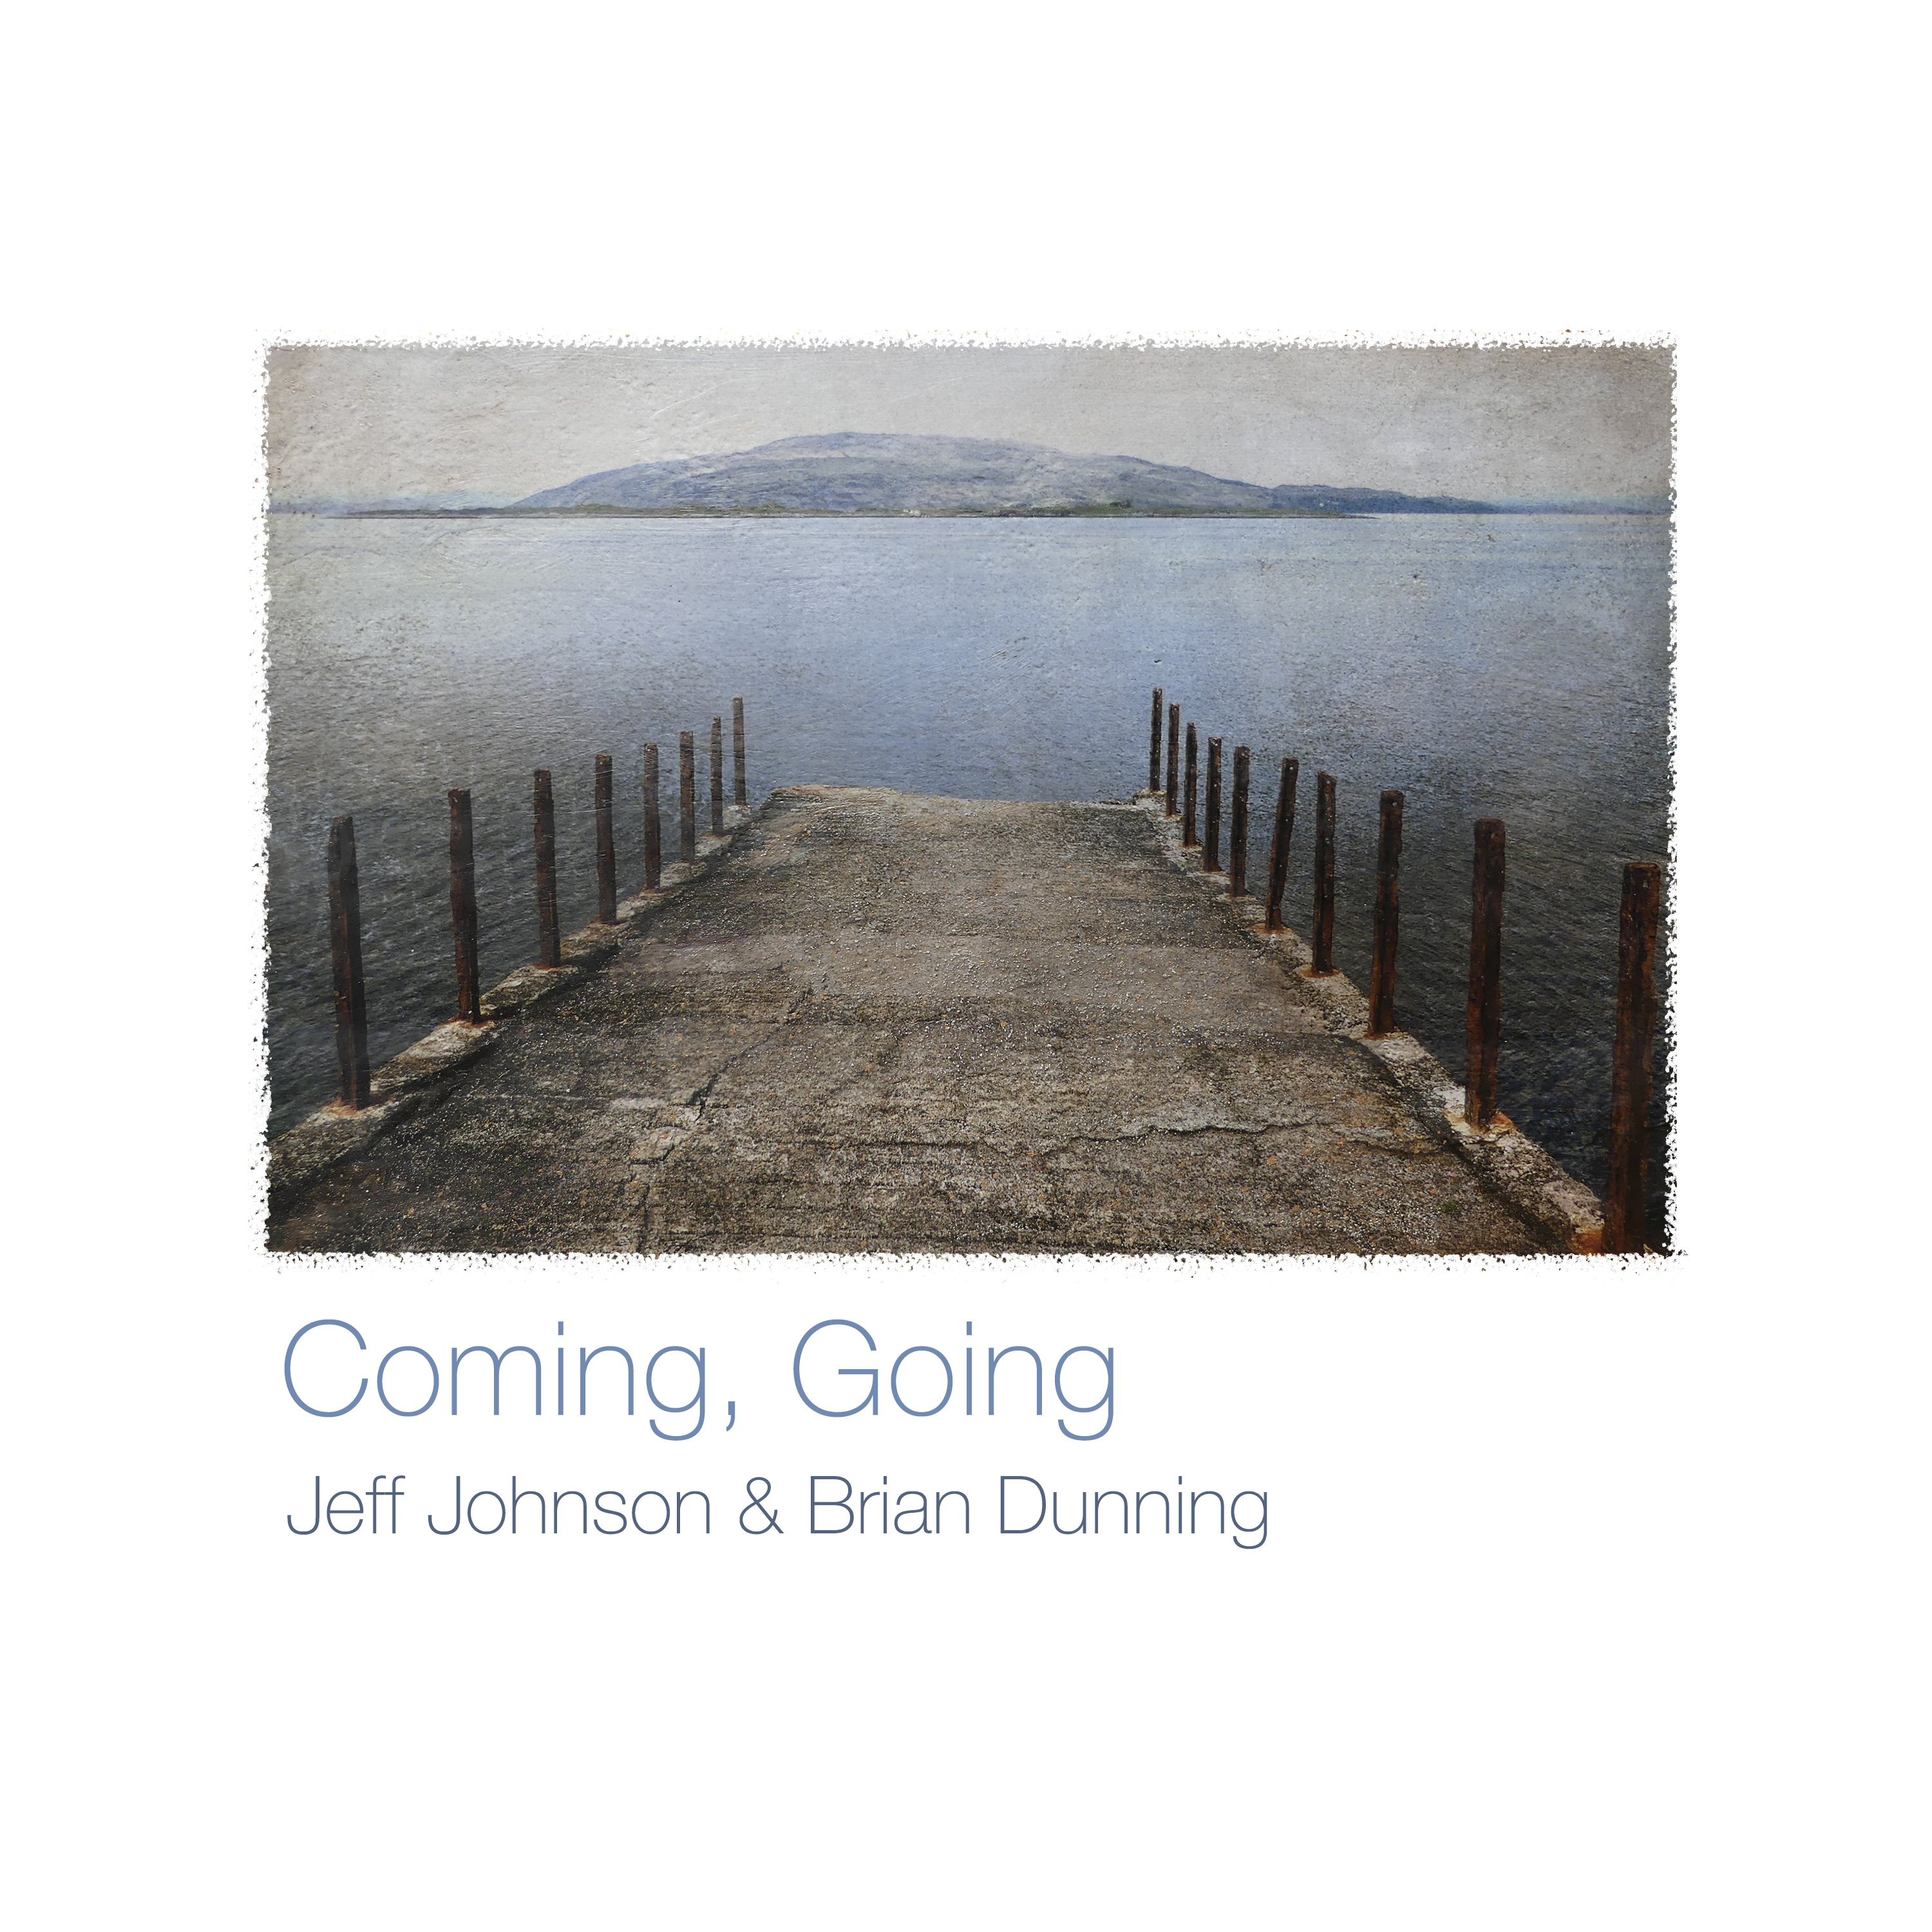 Art for Cadoc’s Blessing by Jeff Johnson & Brian Dunning